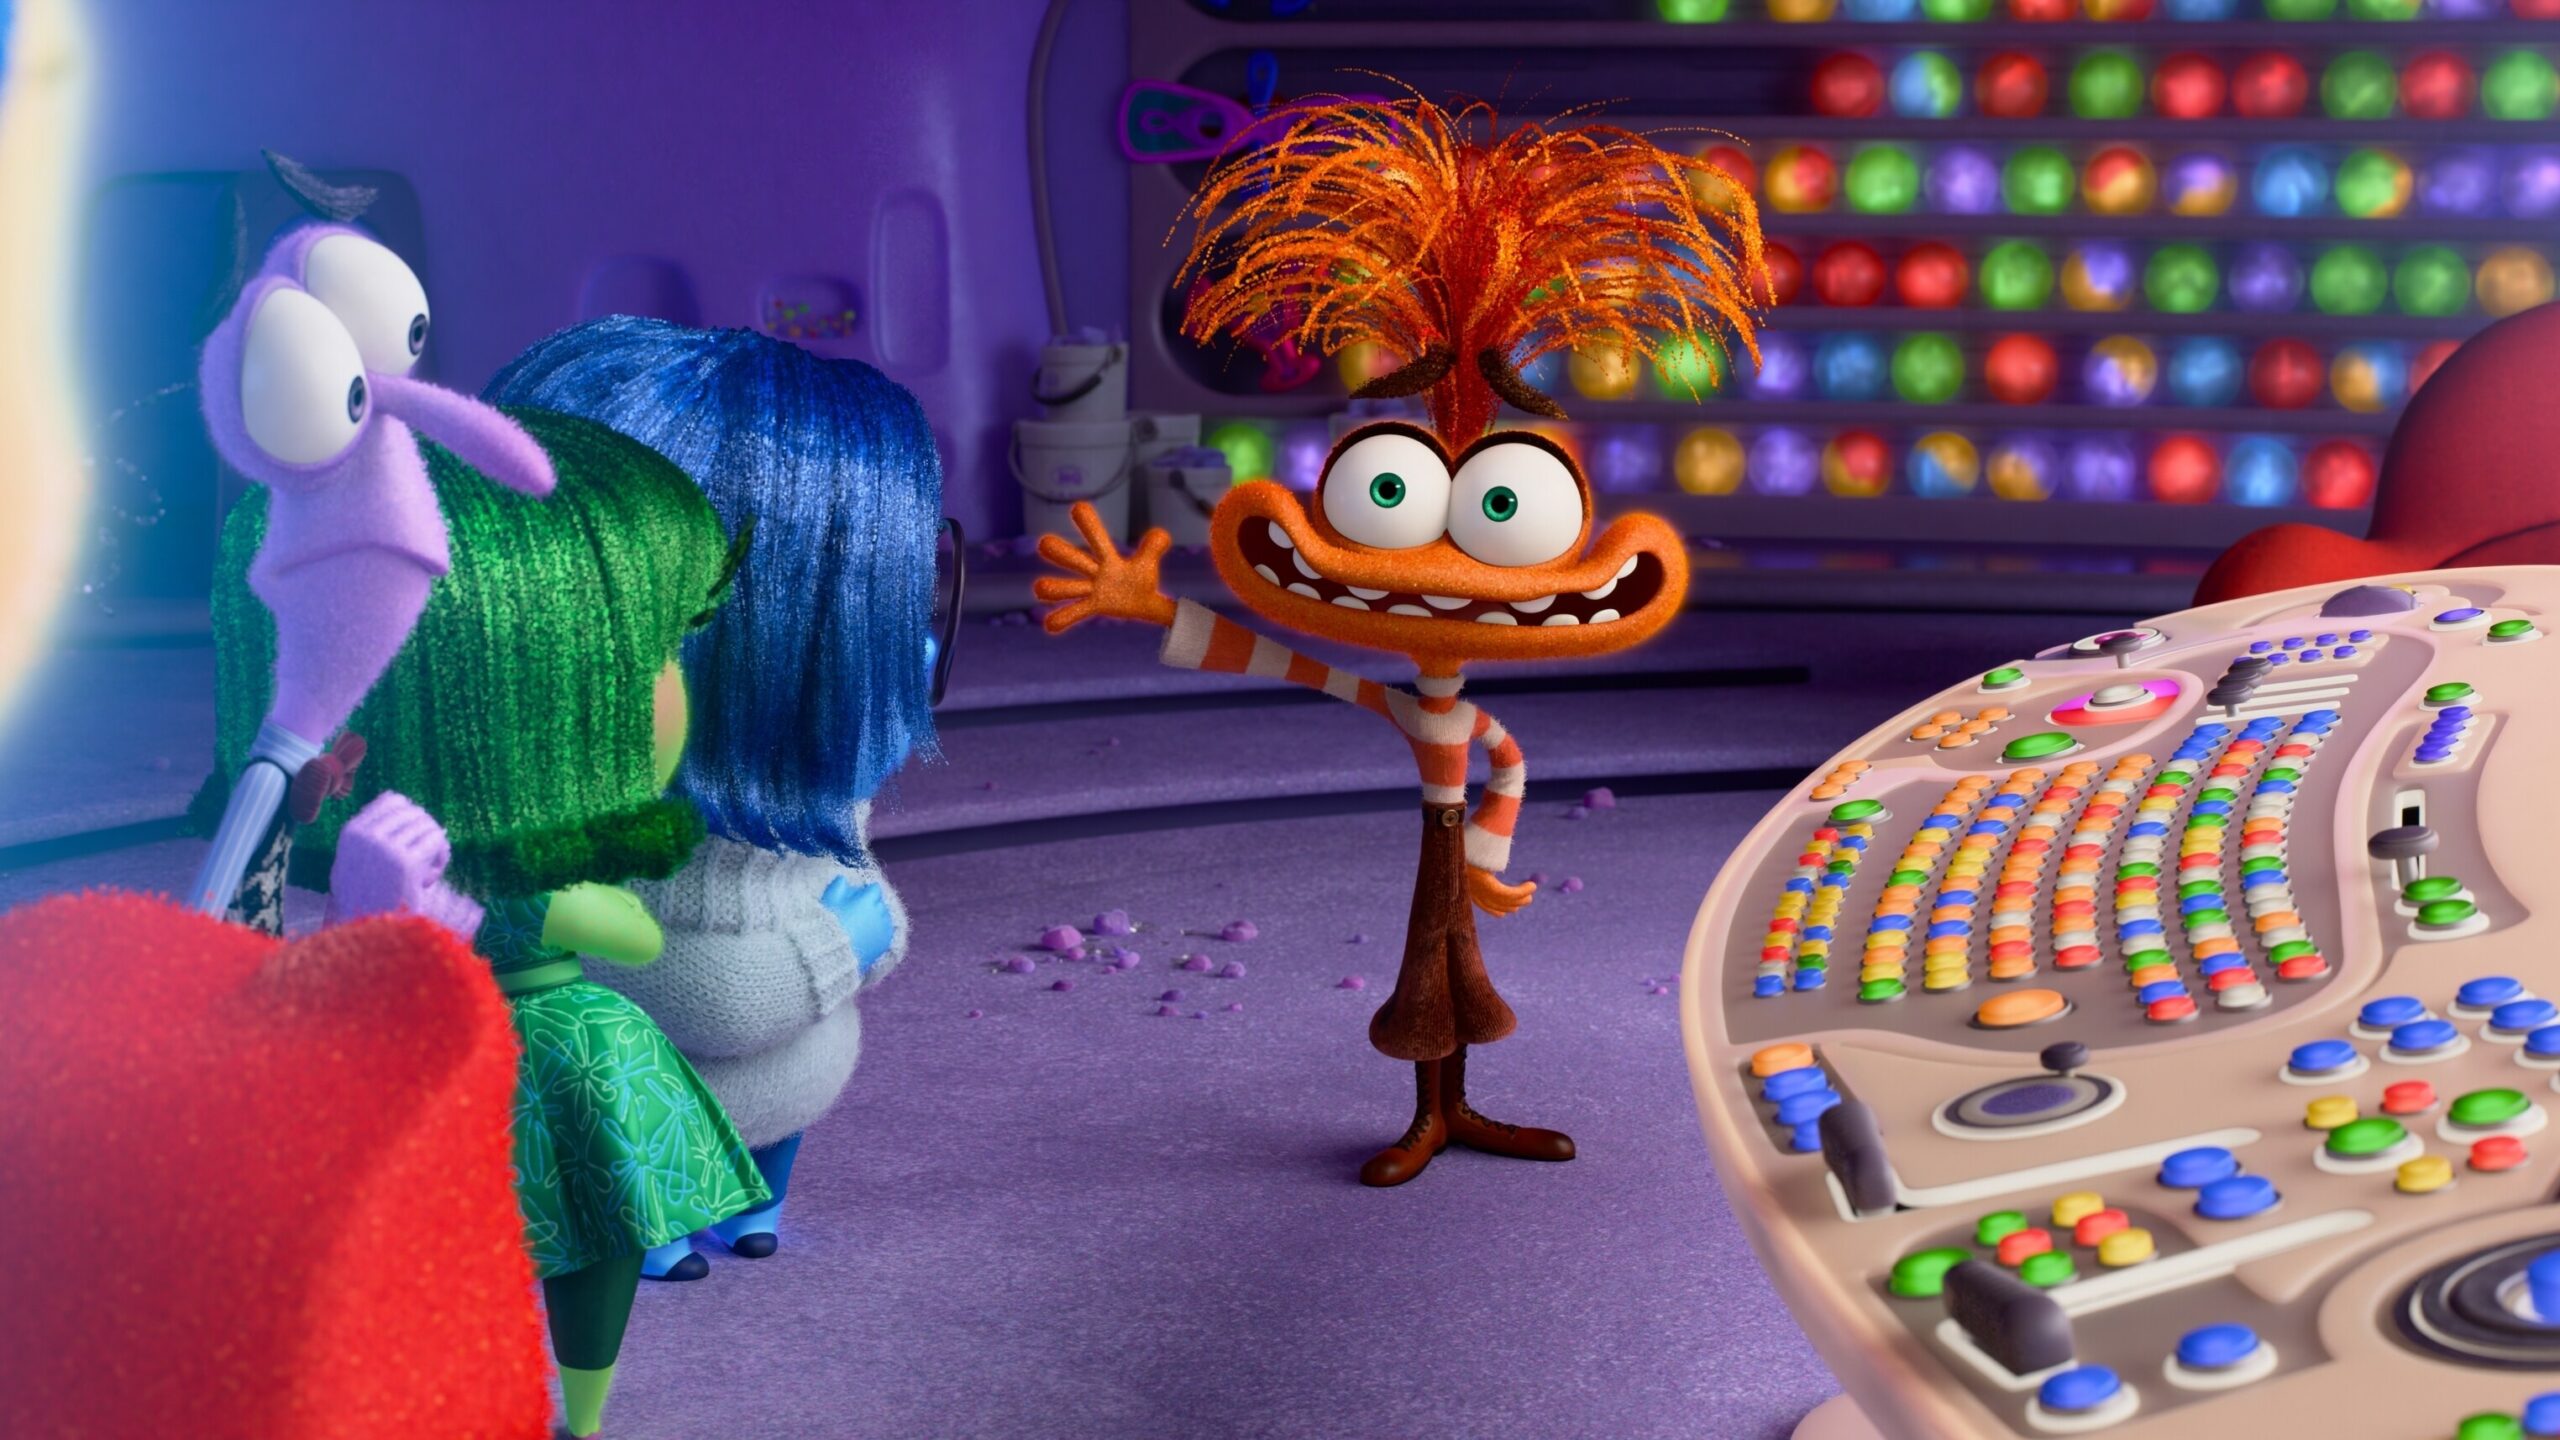 ‘Inside Out 2’ Review: An Emotion-al Journey